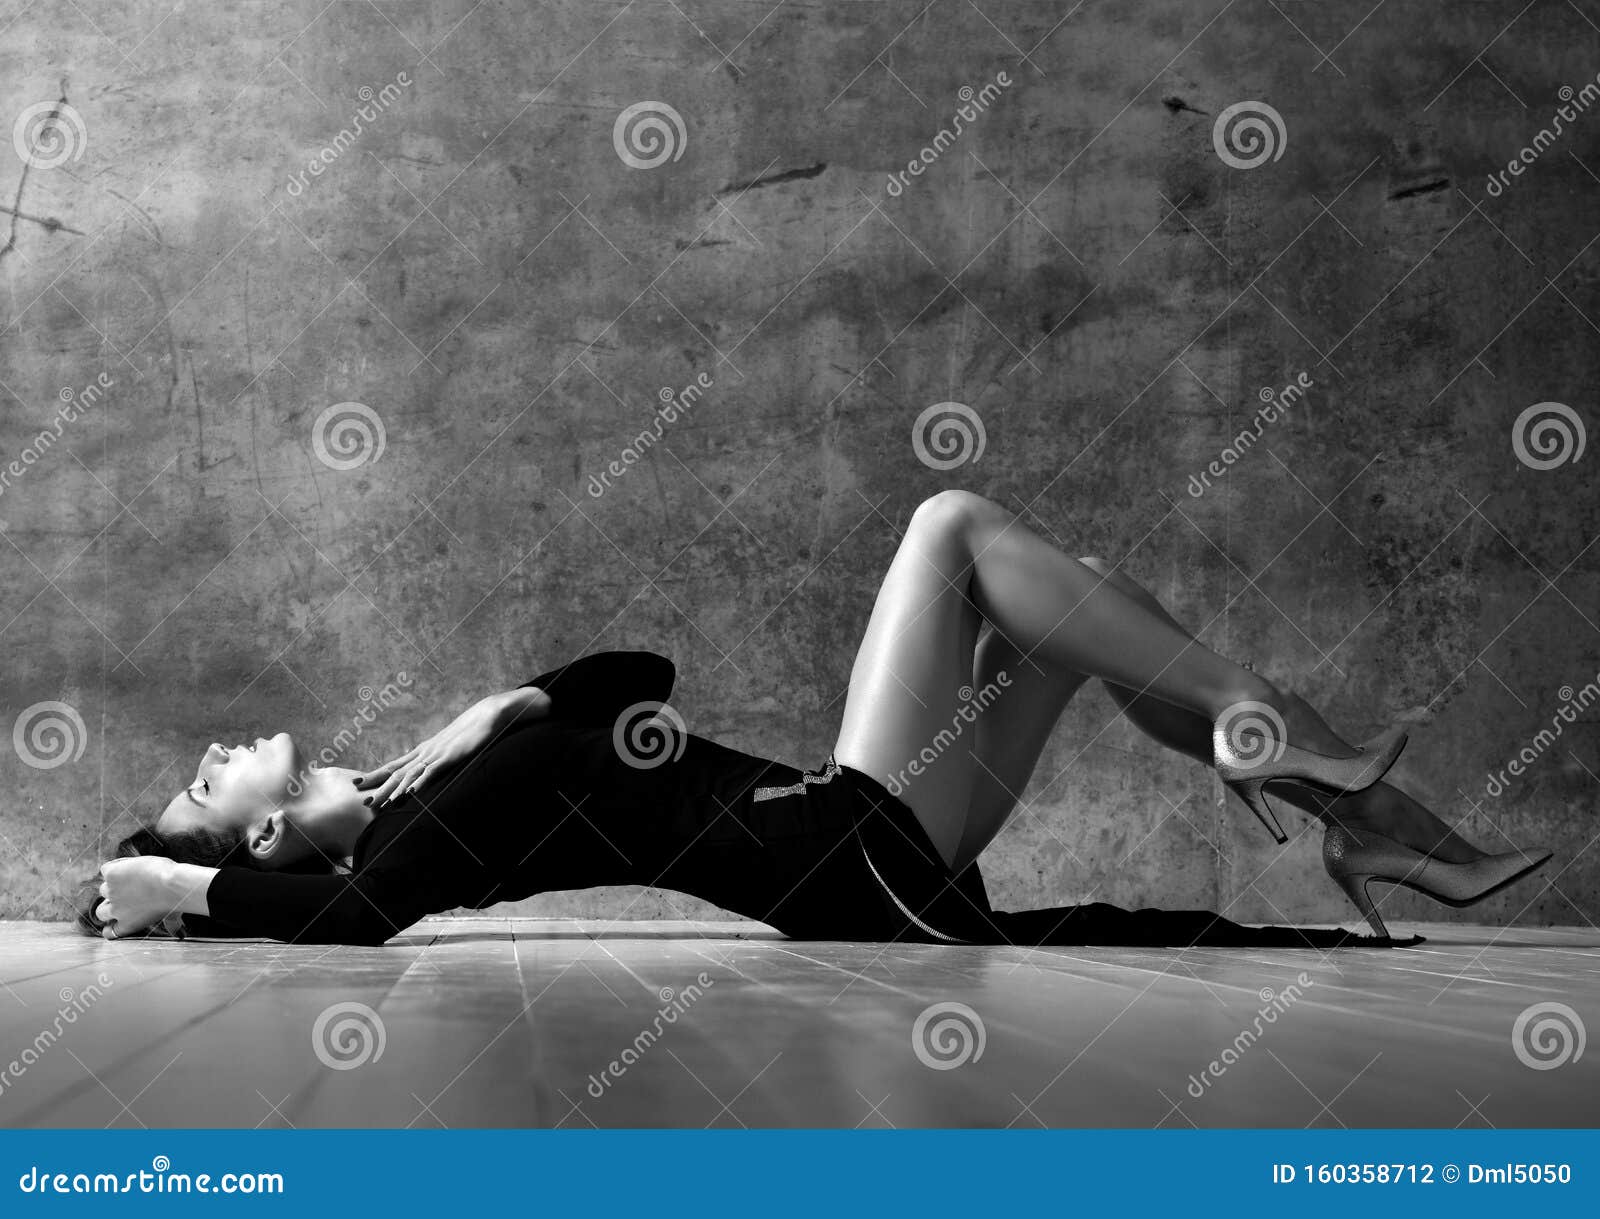 slim woman lying on a floor sexy with gorgeous legs on dark wall background. black and white